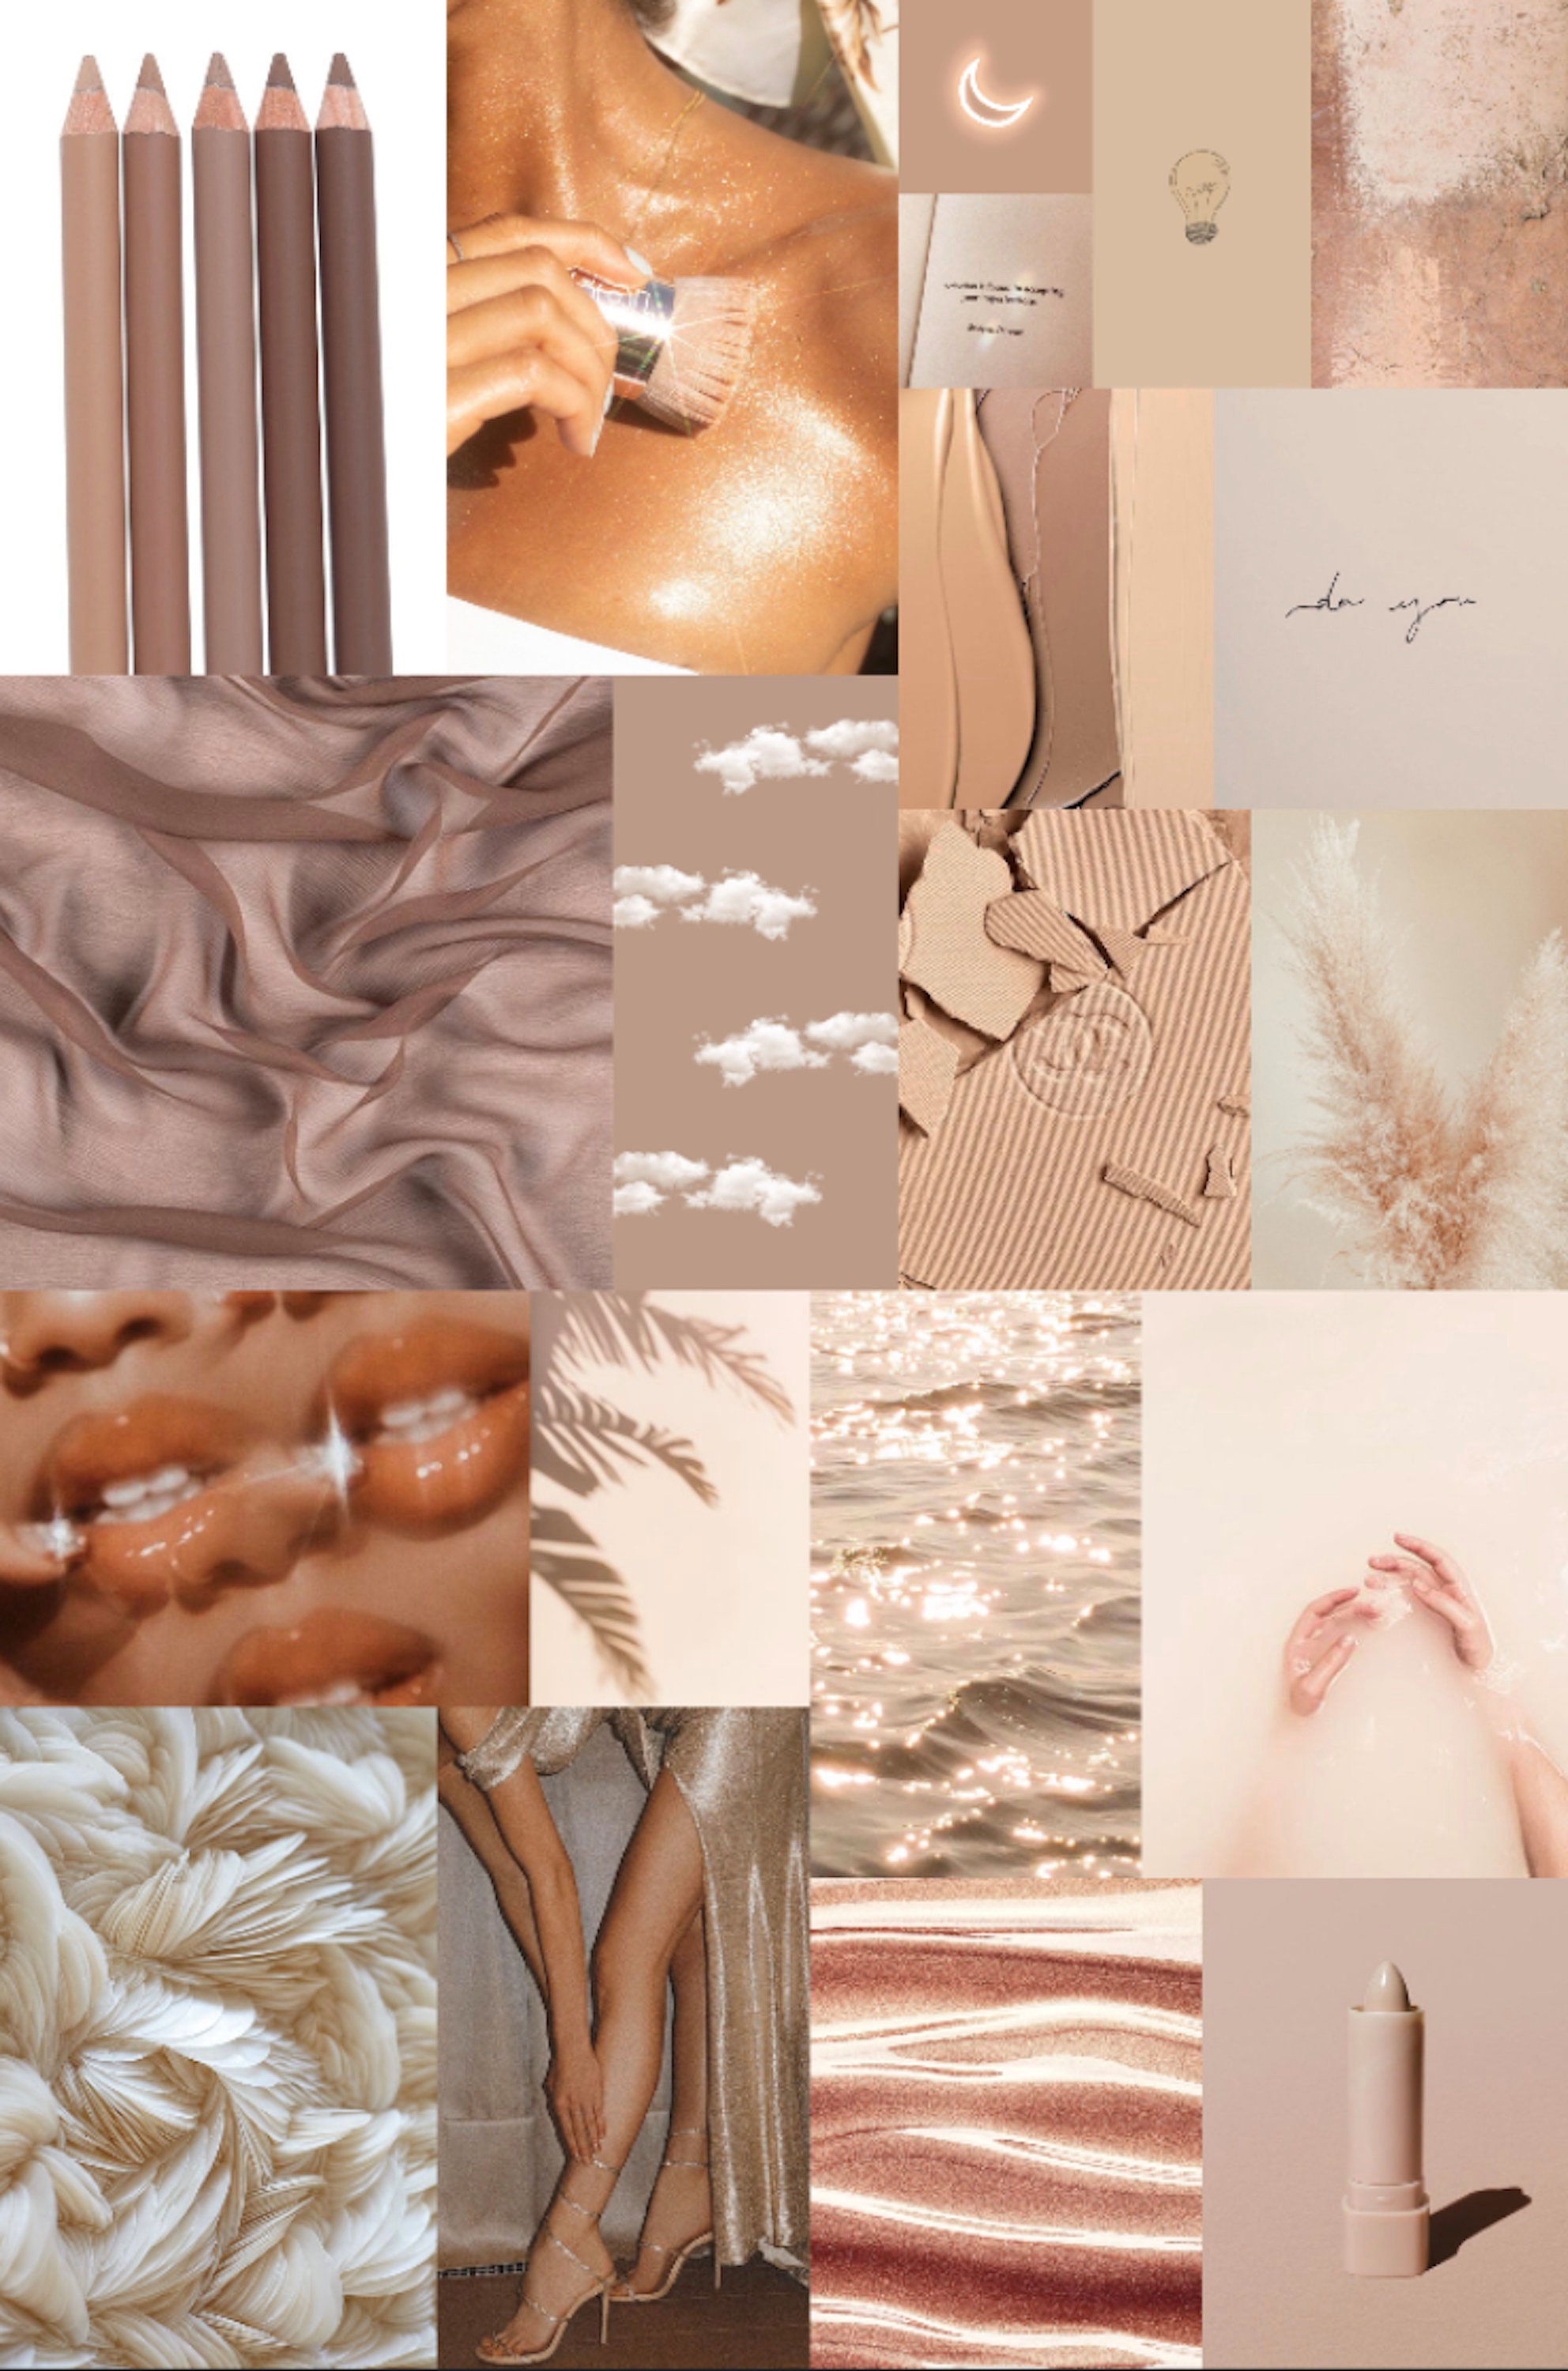 Bougie « Beige aesthetic » – Designed by Cloé